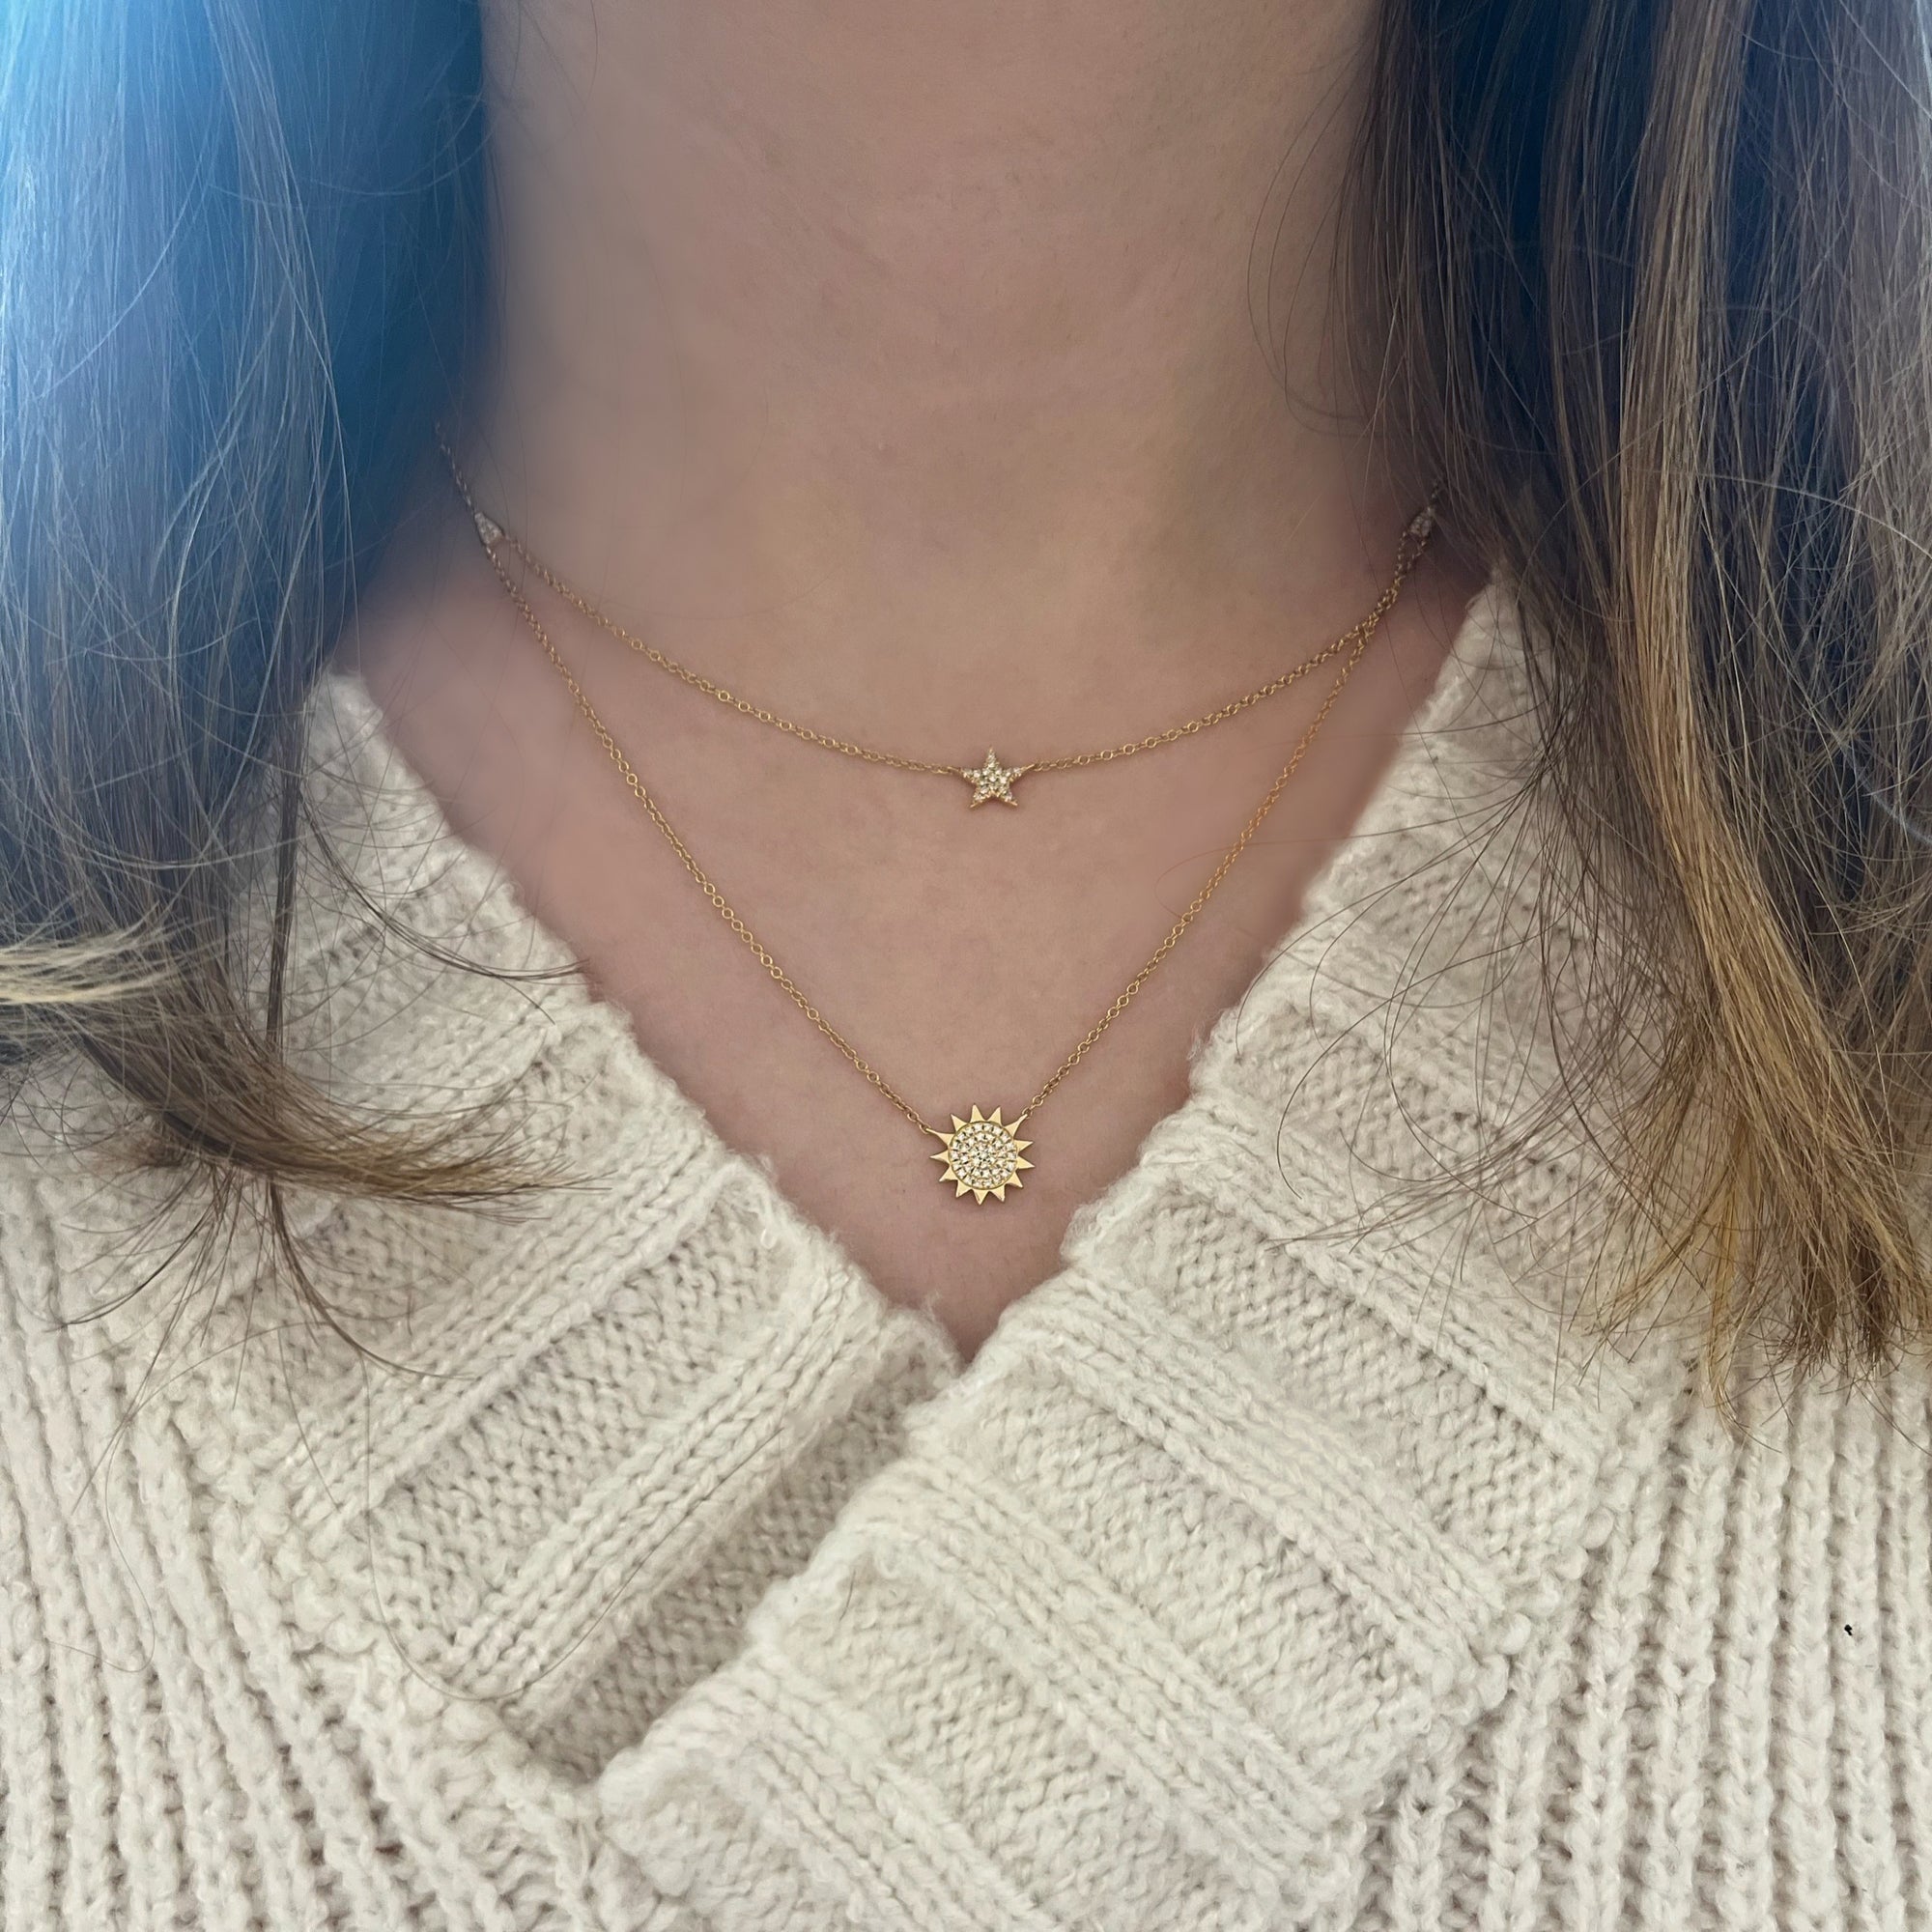 Sun & Star Layered Diamond Necklace  -14k gold weighing 1.5 grams  -Round diamonds weighing .06 carats  Available in yellow, white, & rose gold.